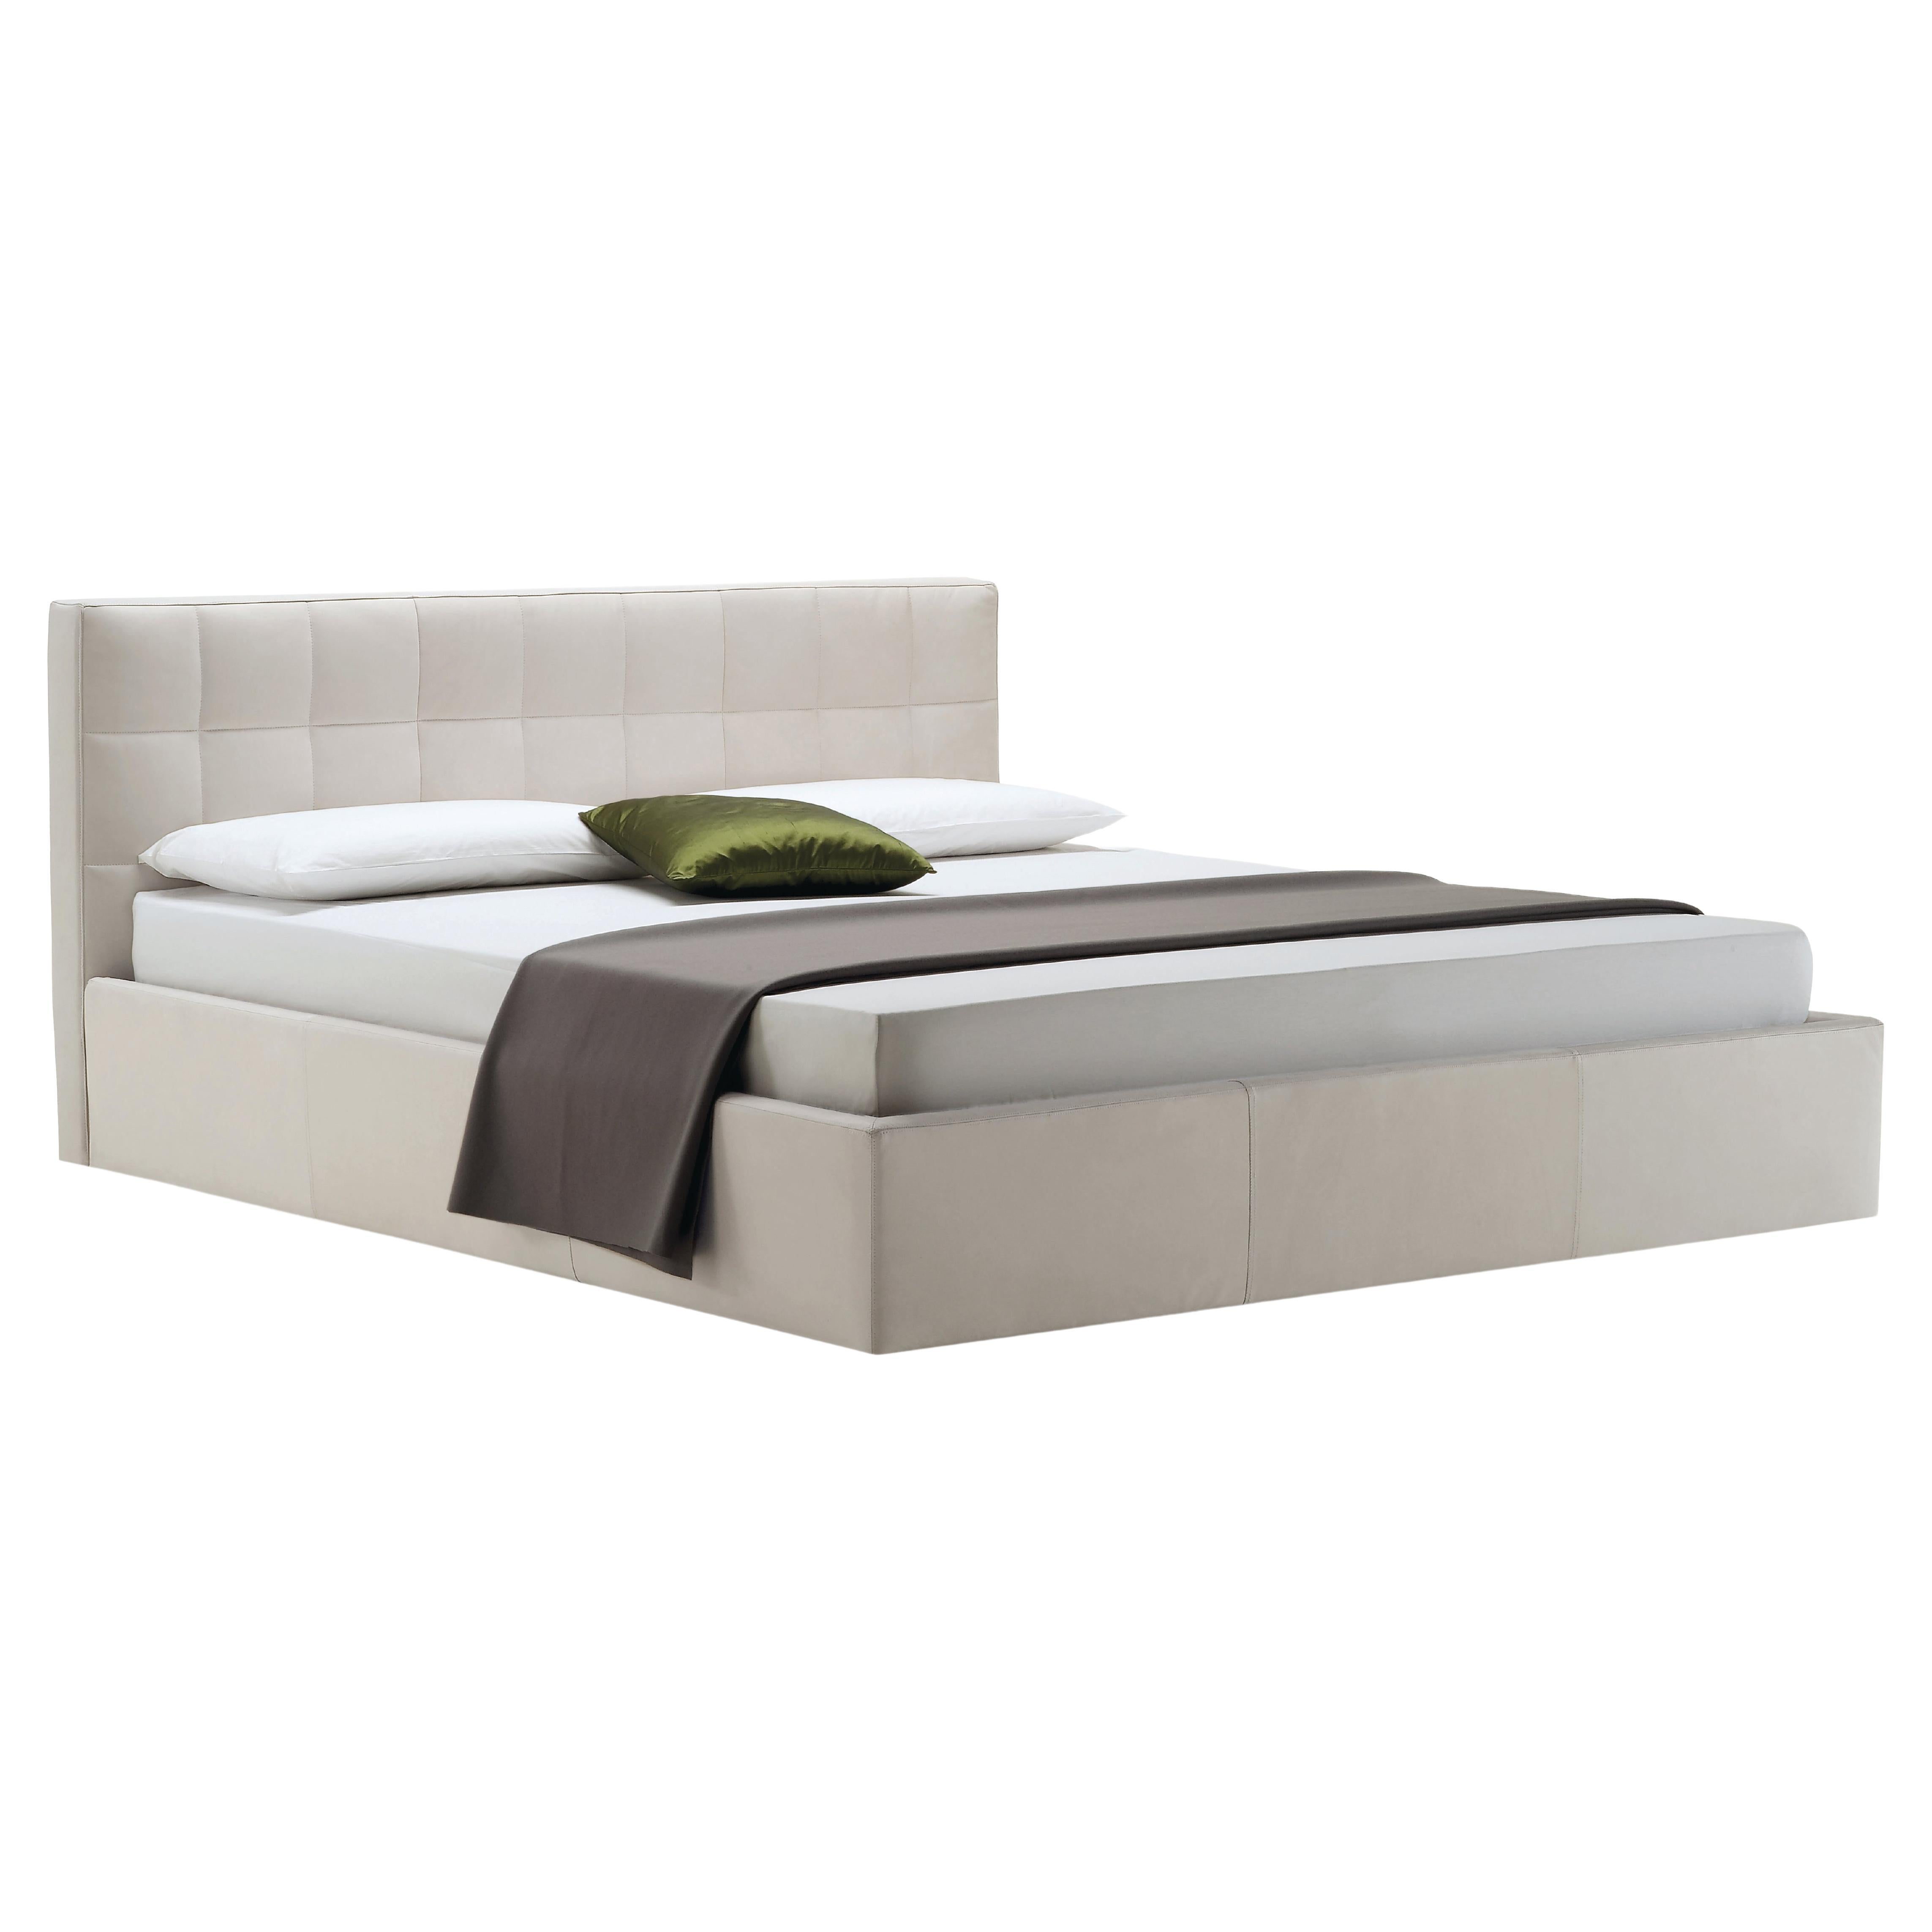 Zanotta Large Box Bed with Container Unit in Beige Upholstery with Steel Frame